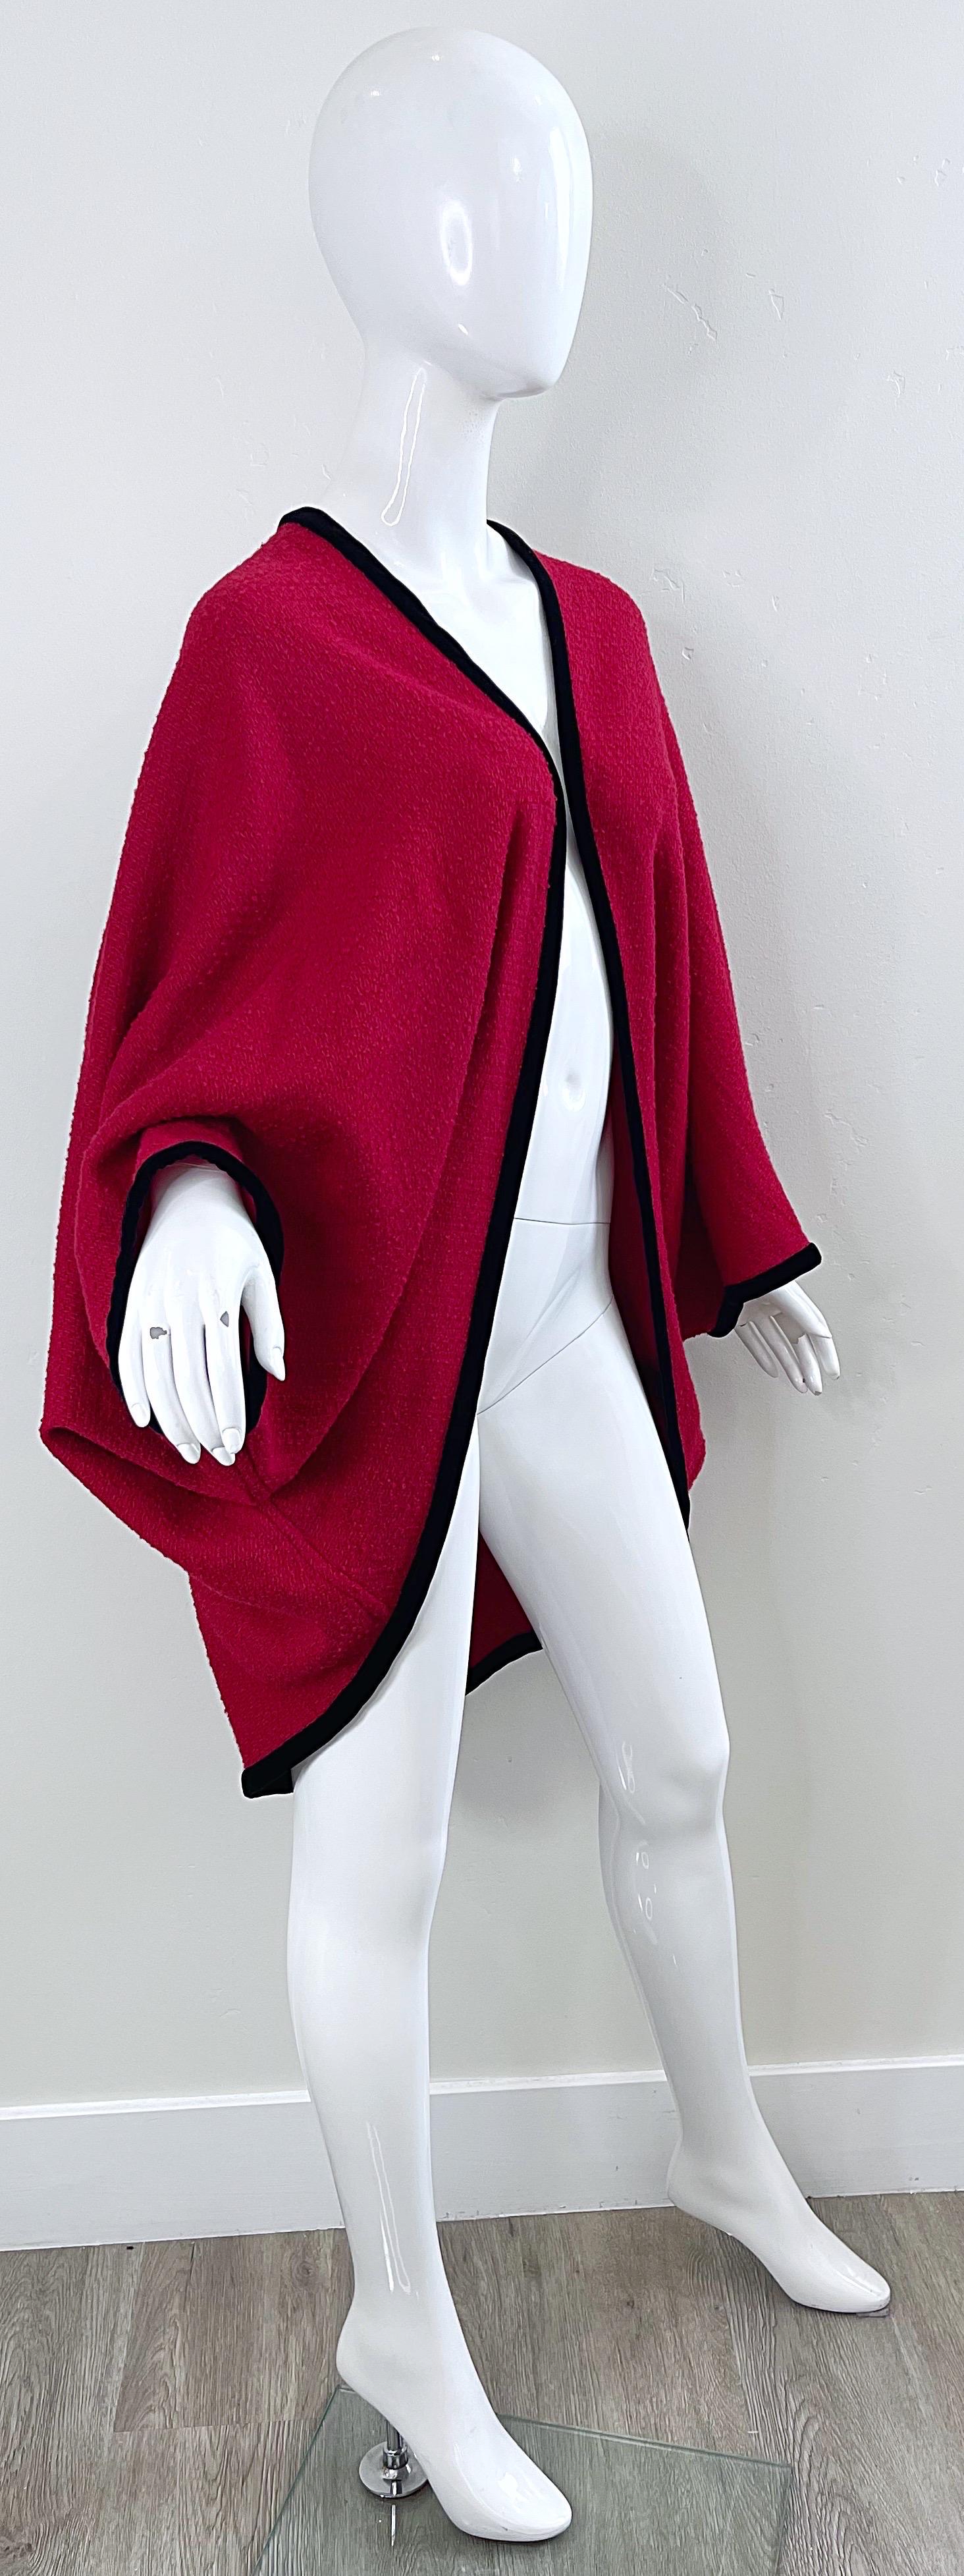 Karl Lagerfeld 1980s Lipstick Red Boiled Wool Cocoon Vintage Cape Kimono Jacket For Sale 6